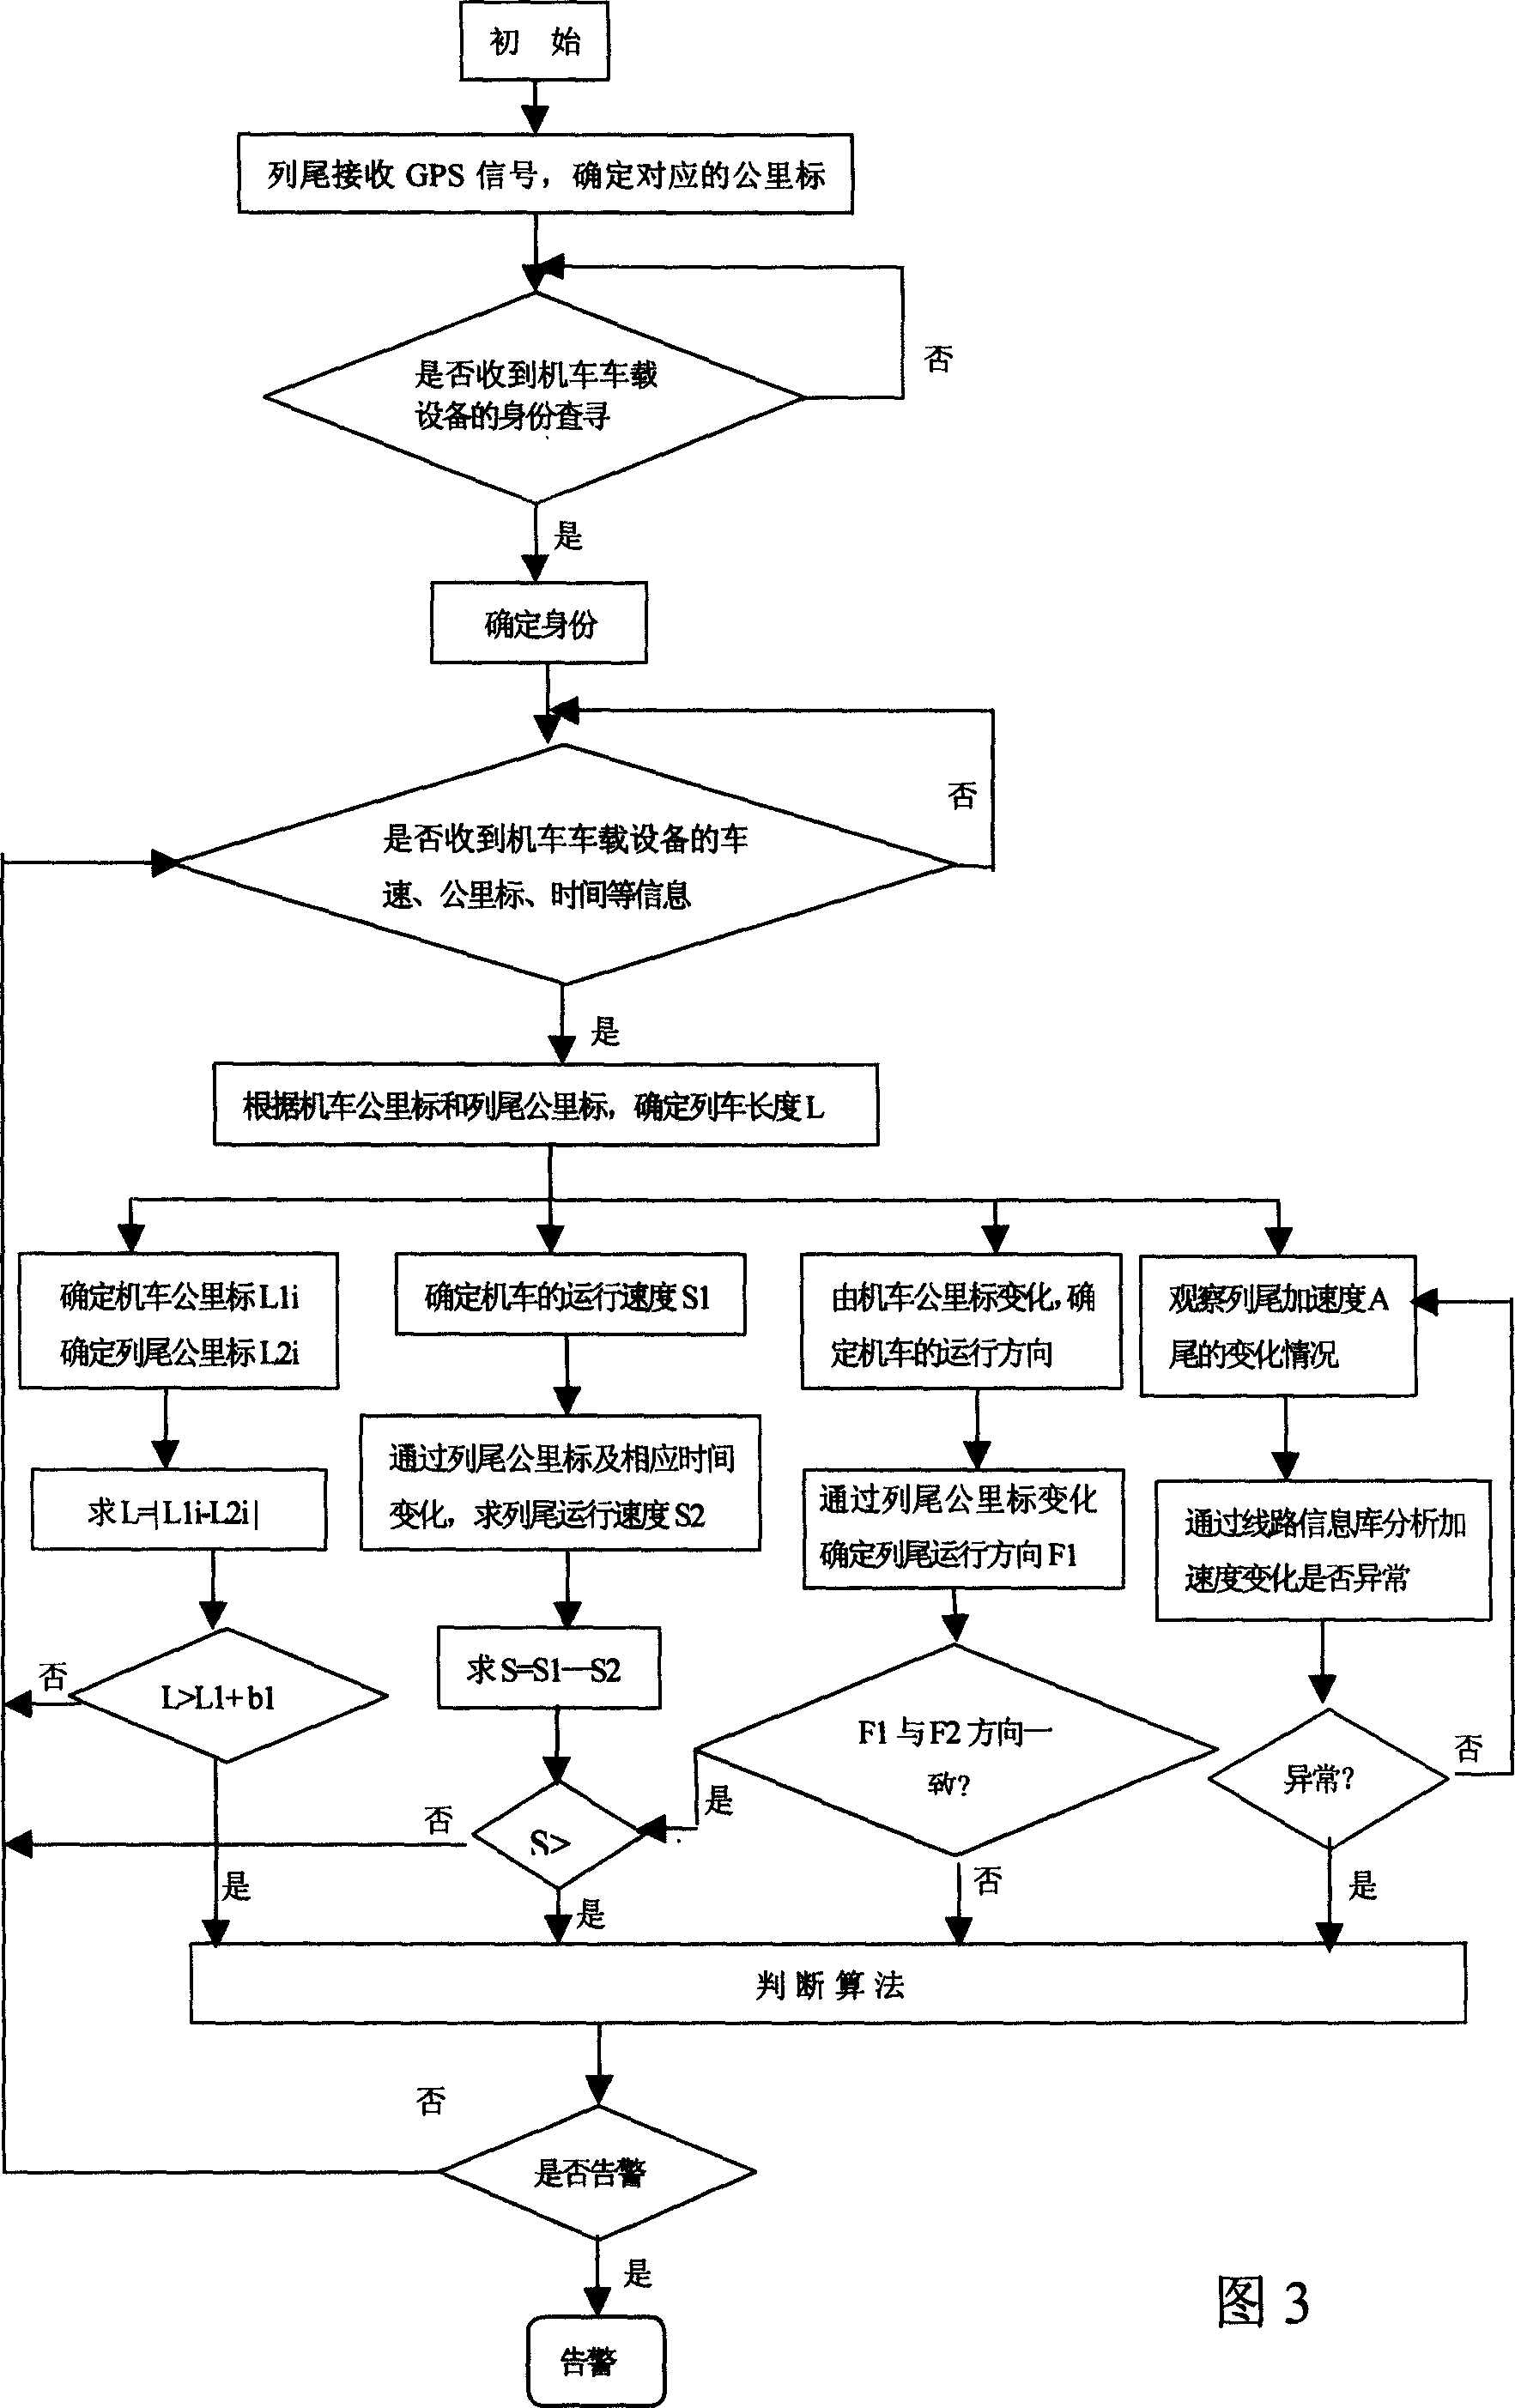 Method for testing out of order for running train and alarm device